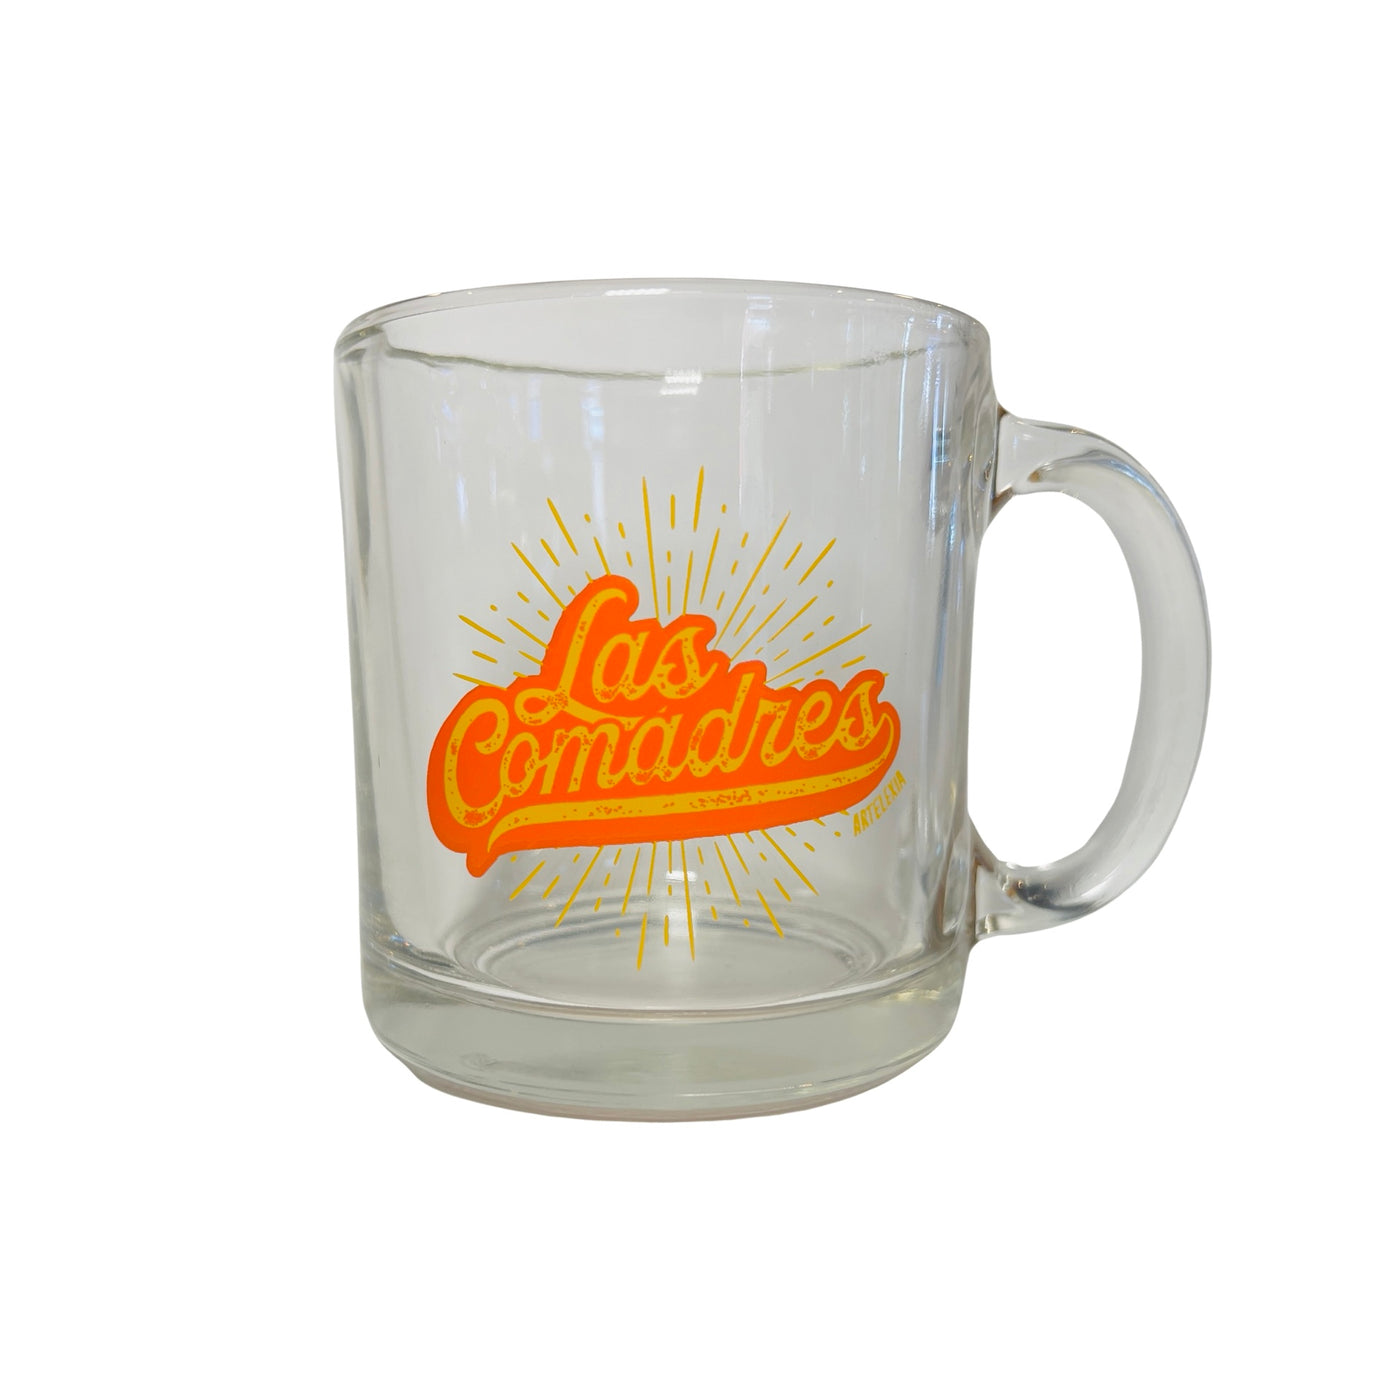 clear glass mug with the phrase Las Comadres in yellow and orange lettering